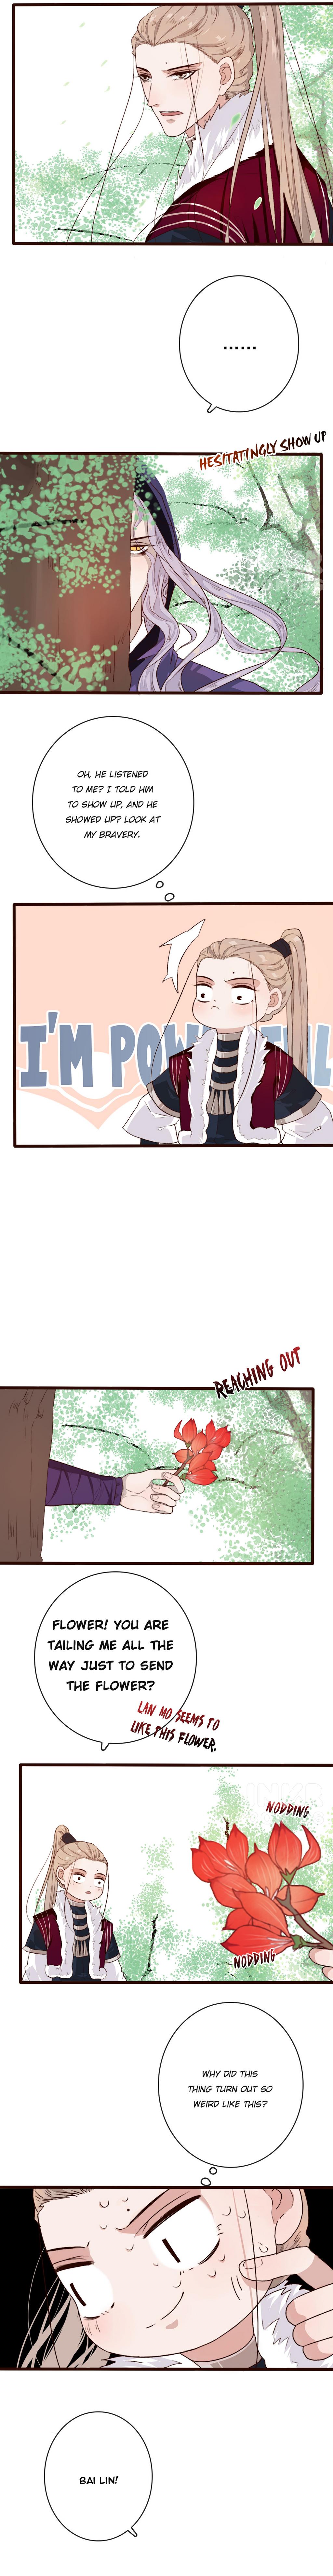 The Beauty Of The Apricot Forest - Page 3